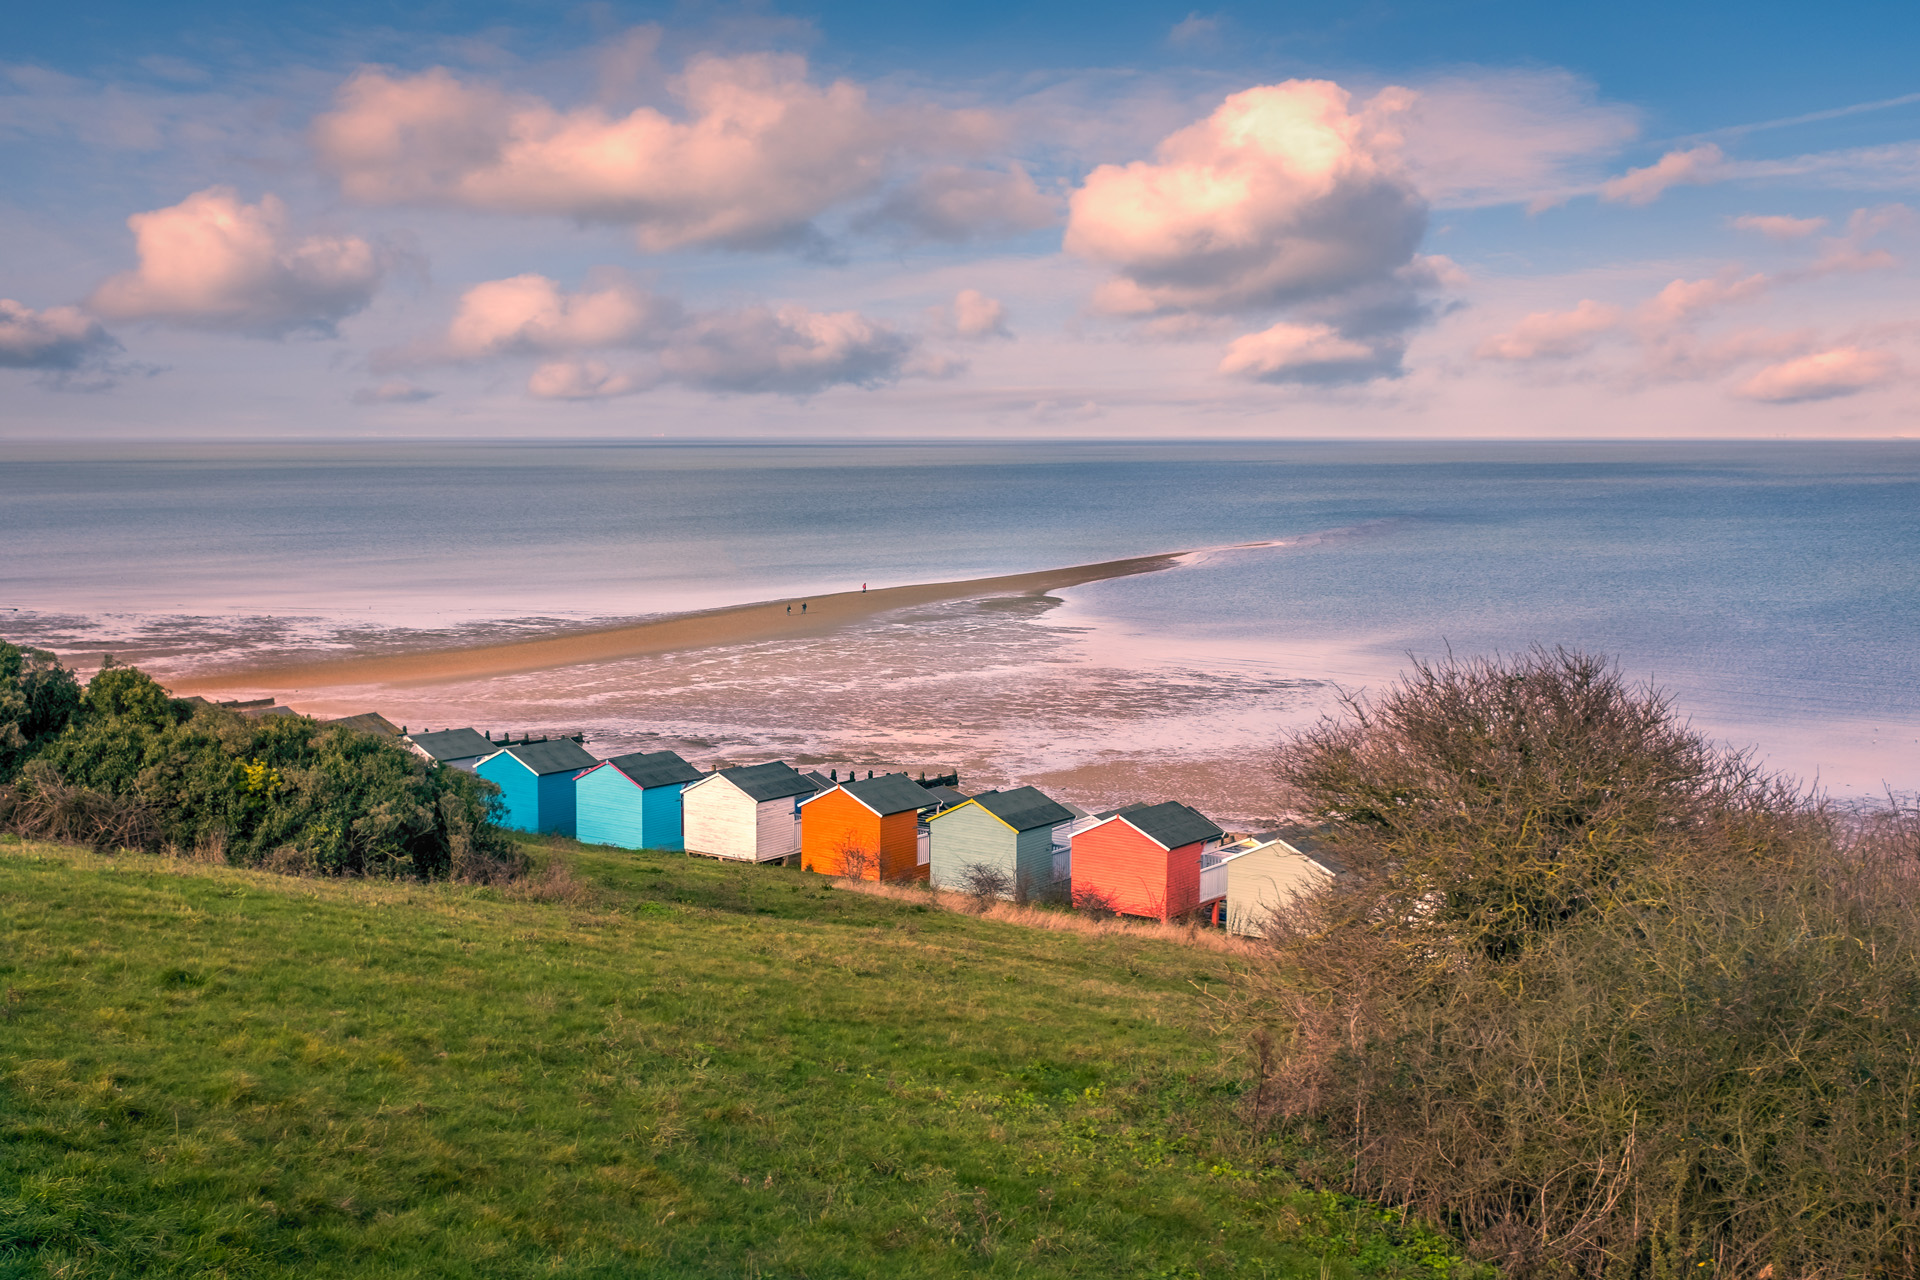 Impressive winter clouds in a cool blue sky over the beach huts and natural spit of land that stretches out to sea on the beach in Tankerton, Whitstable, Kent, UK. A three people are strolling on the natural and locally named 'Street'